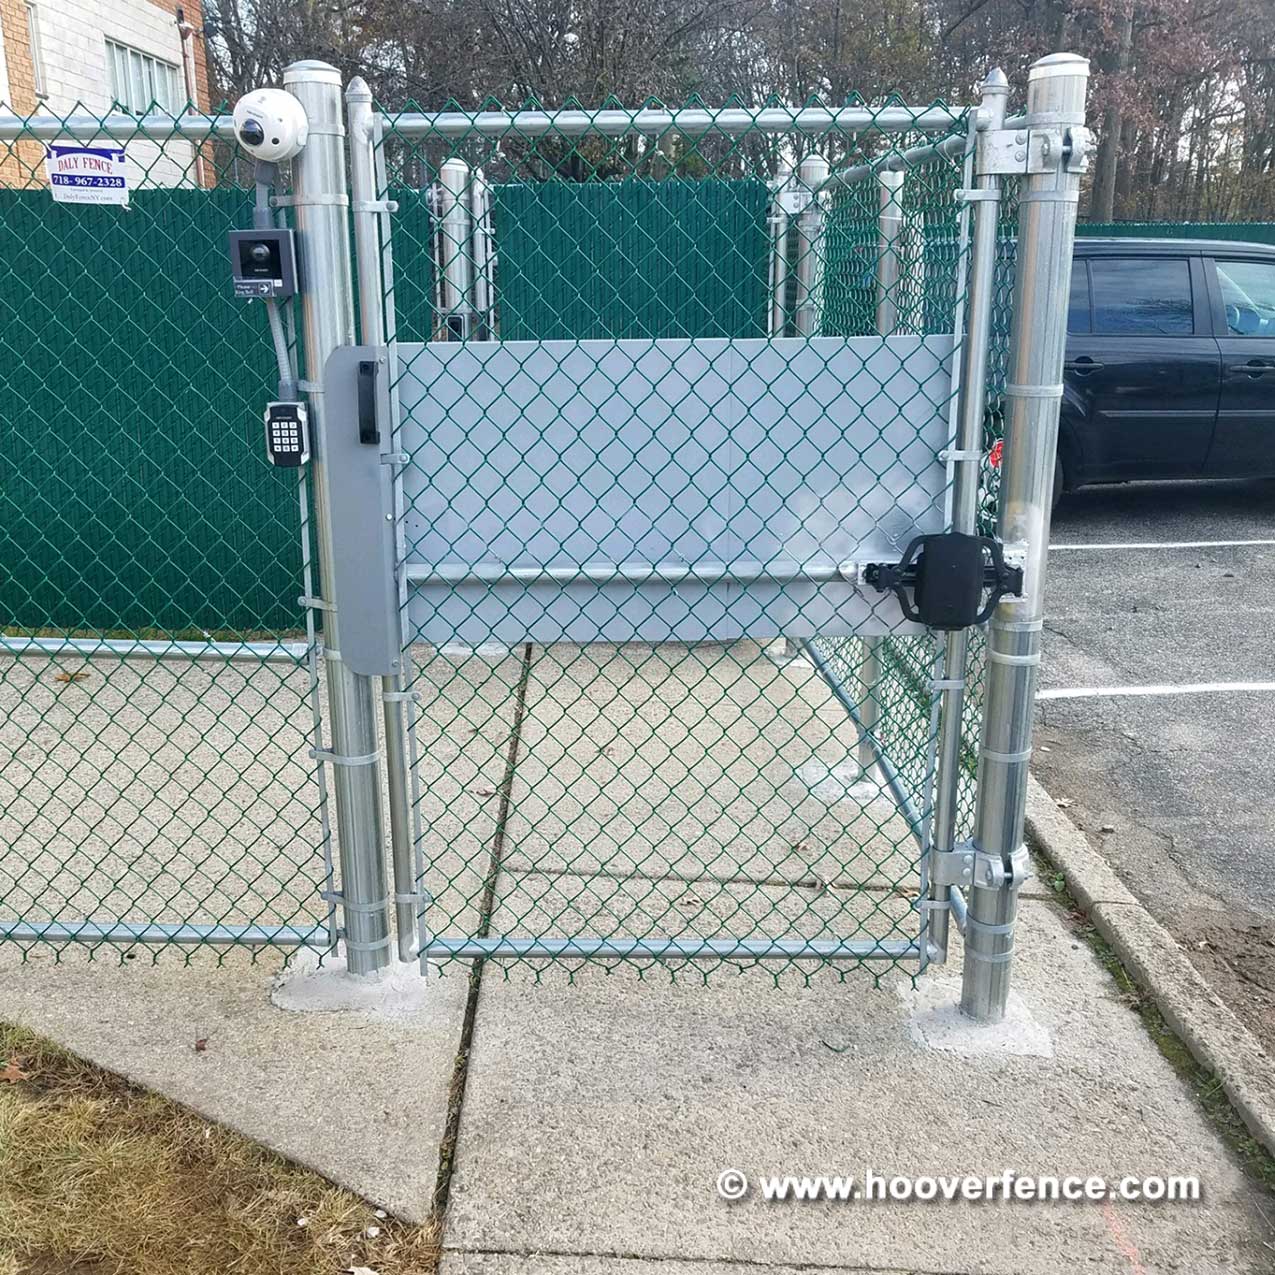 Customer Install - KantSlam Gate Closers on Chain Link Access Control Gates - Staten Island, NY